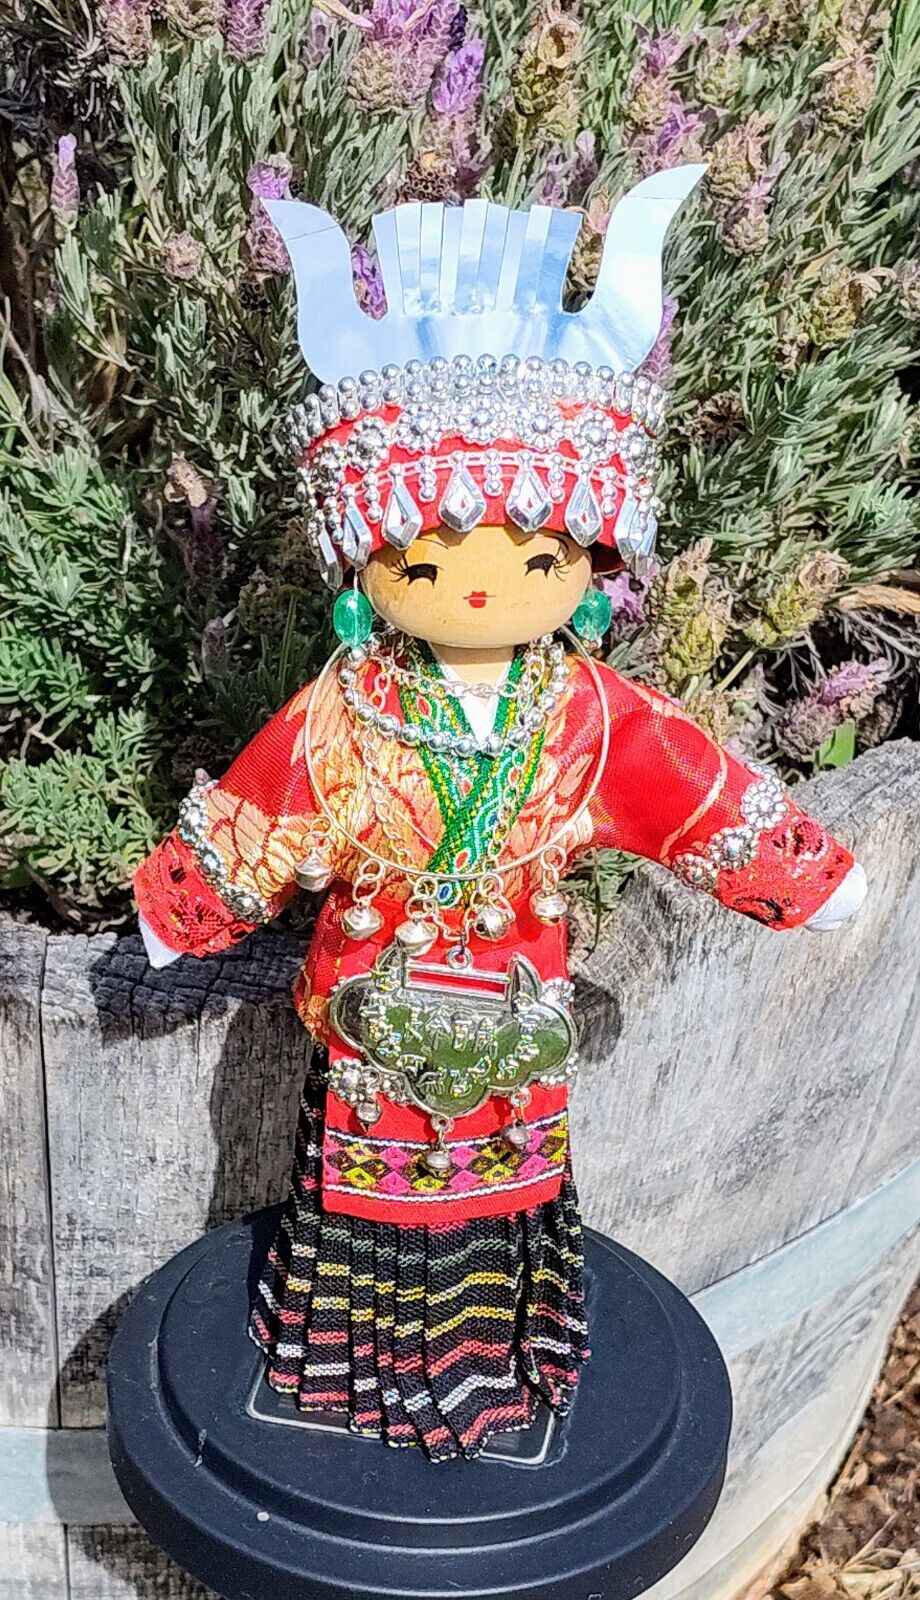 🔥 CHINESE CULTURUAL HANDMADE WOOD & CLOTH DOLL Traditional MIAO Clothes 10" 🔥 Qian Cuixing